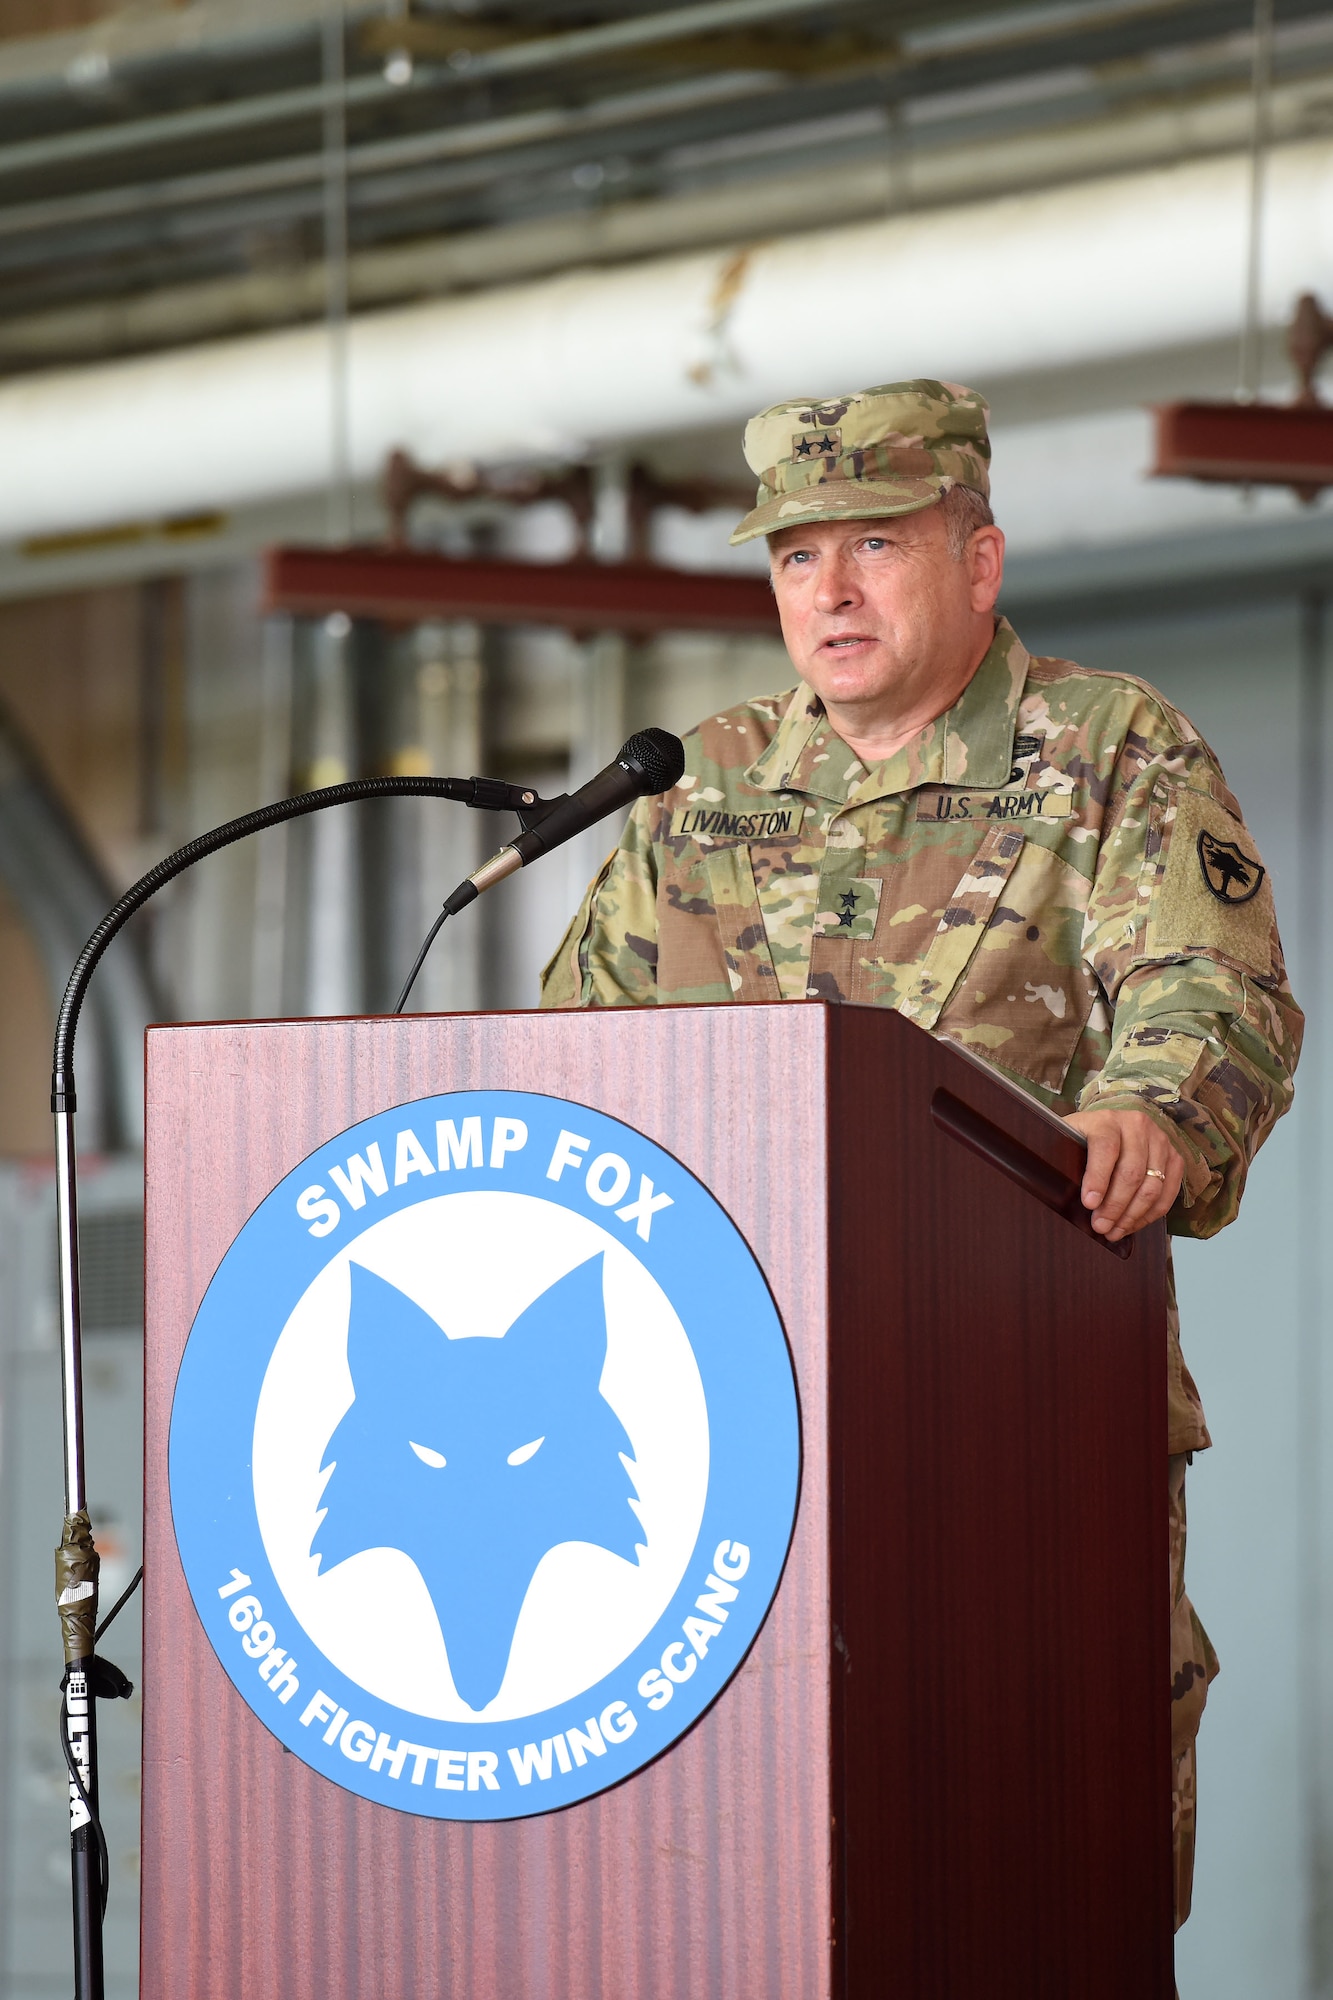 U.S. Army Maj. Gen. Robert E. Livingston Jr., the Adjutant General of the South Carolina National Guard, addresses Airmen of the 169th Fighter Wing during a change of command ceremony at McEntire Joint National Guard Base, S.C., June 23, 2018. Col. Nicholas Gentile Jr. relinquishes command of the 169th Fighter Wing to Col. Akshai Gandhi. (U.S. Air National Guard photo by Ashleigh Pavelek)